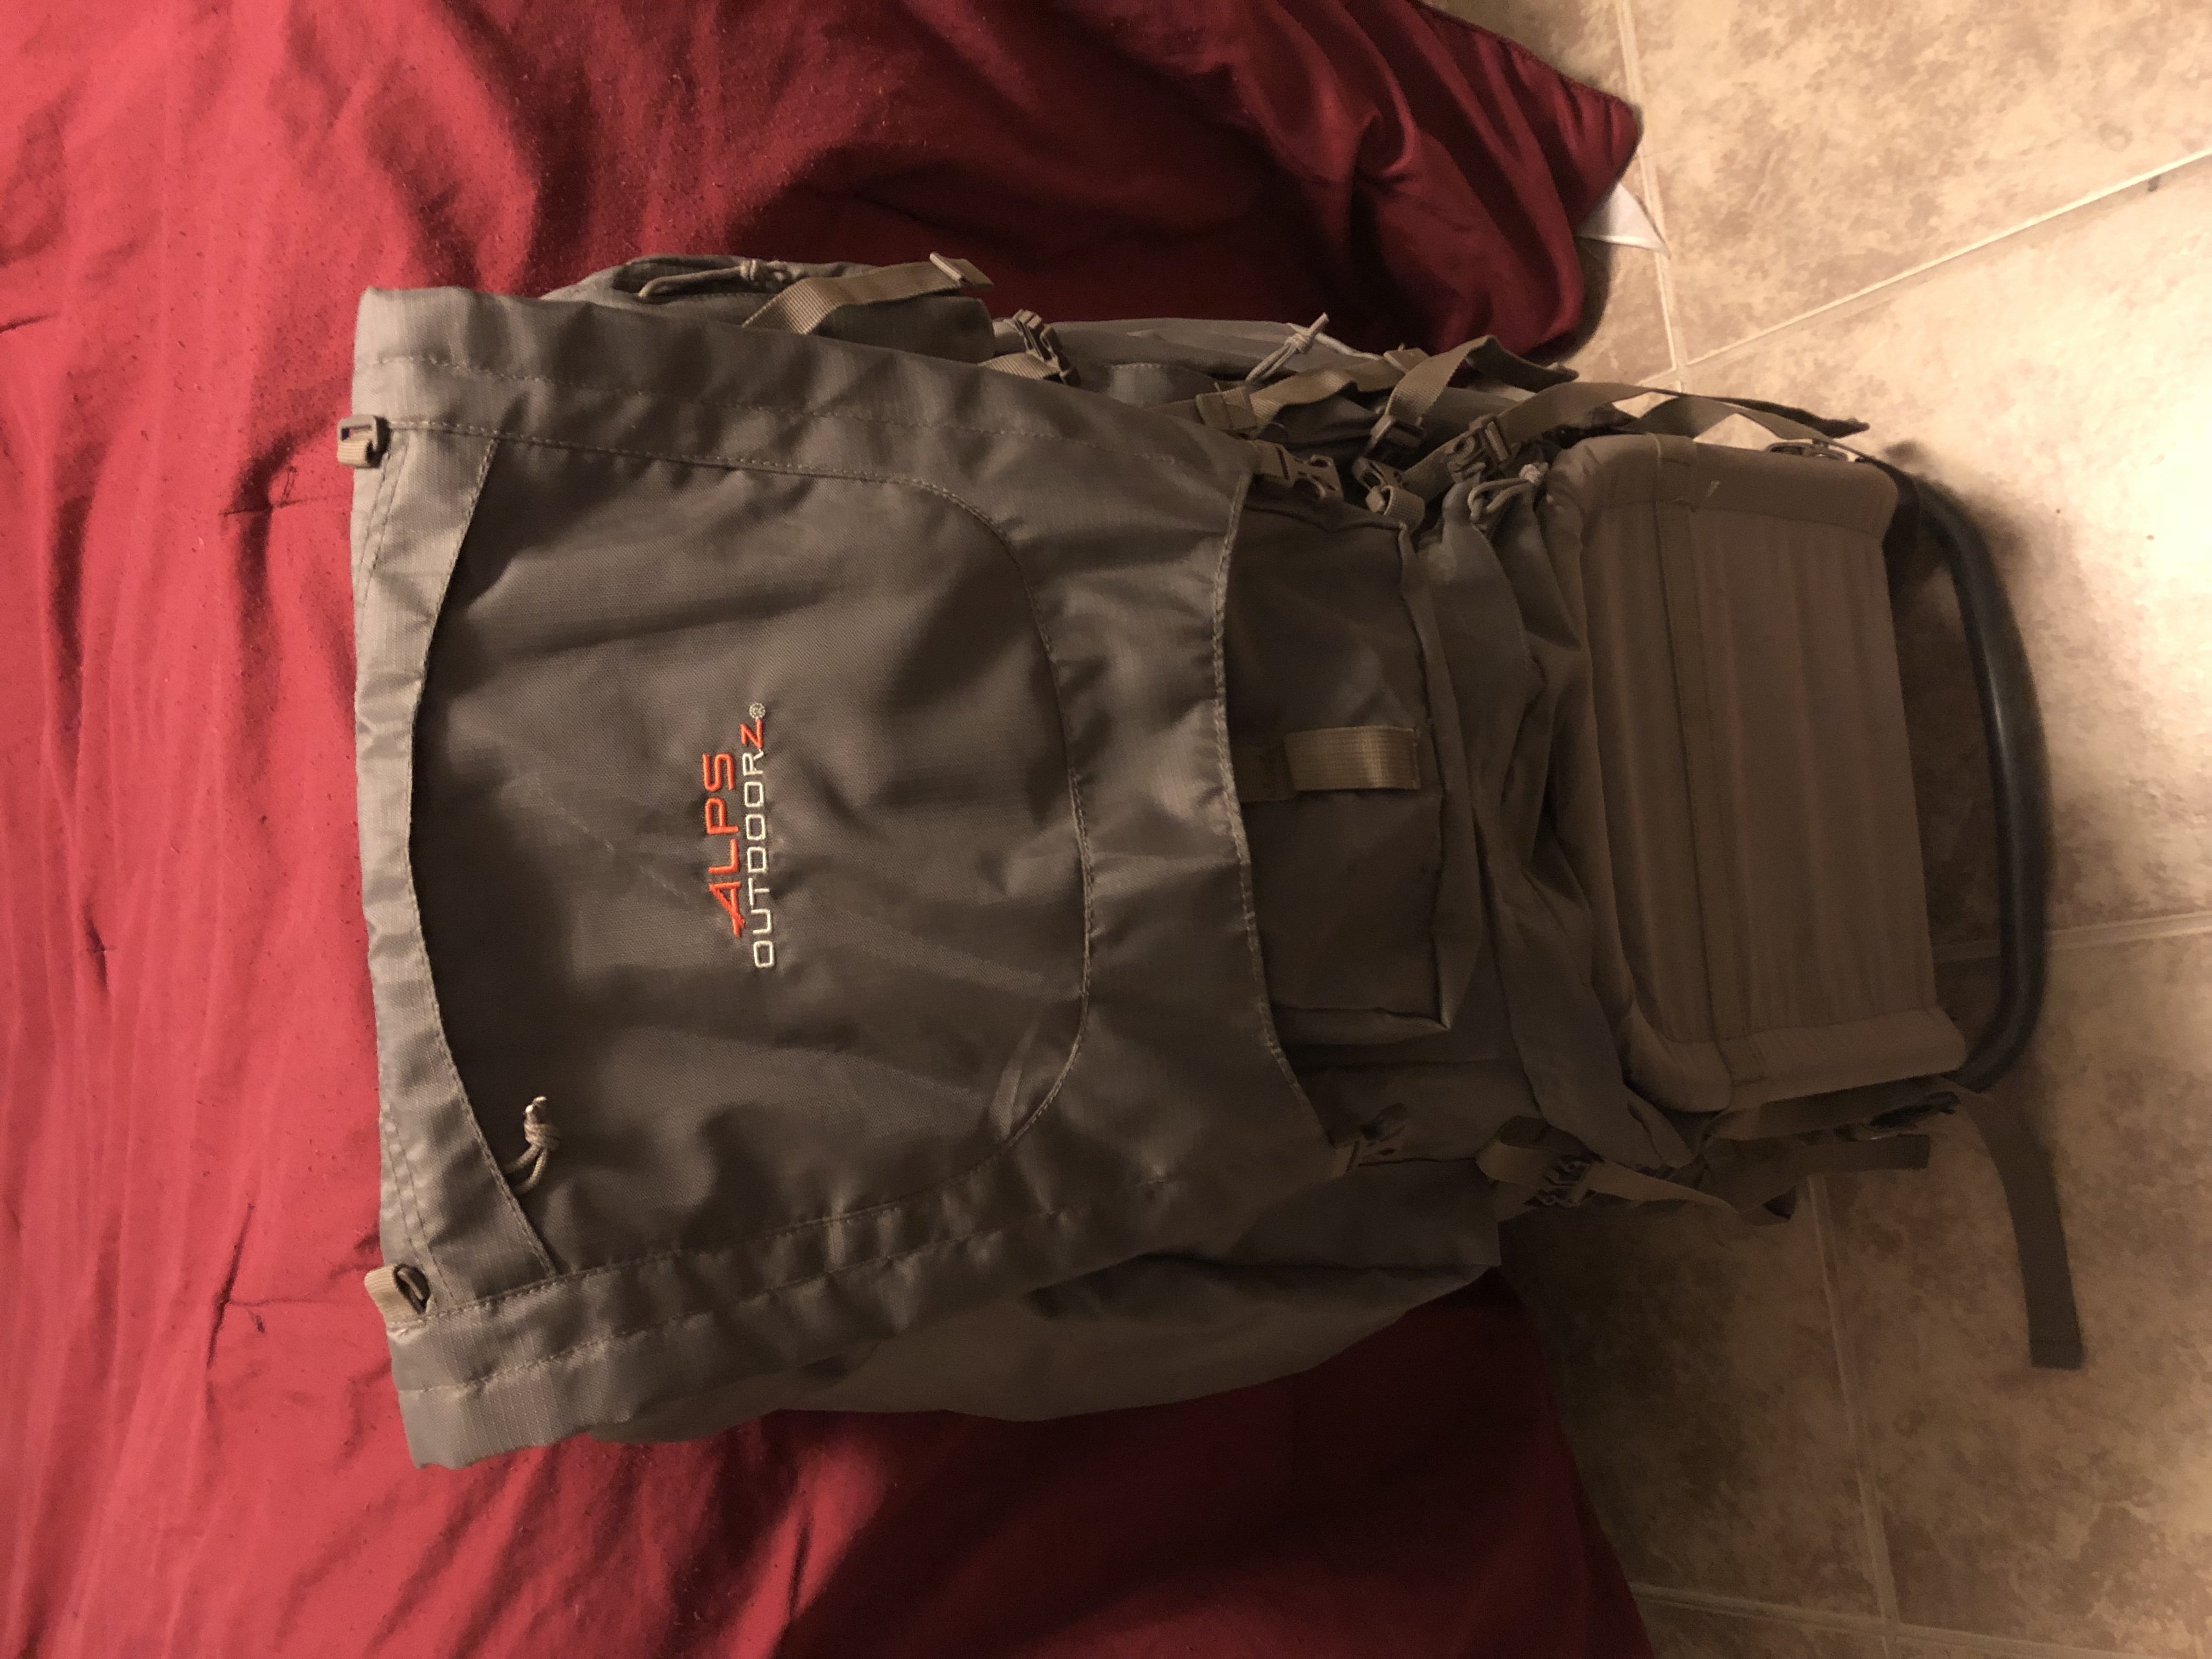 Alps outdoor. Back pack - Classified Ads - CouesWhitetail.com ...